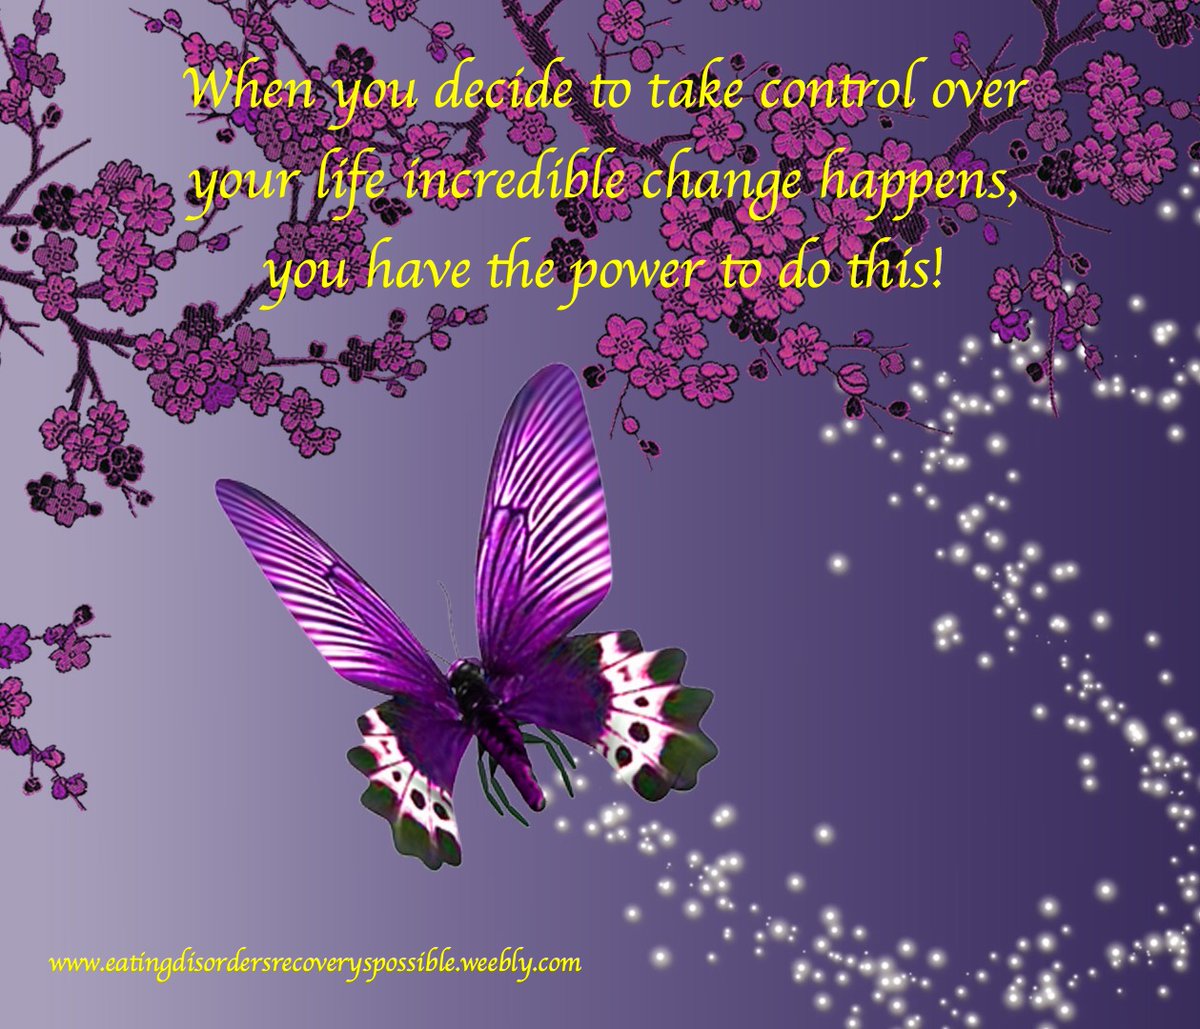 When you decide to take control over your life incredible change happens, you have the power to do this. #anorexia #anxiety #anemia #eatingdisorder #recovery #nevergiveup #AlwaysKeepFighting #fibromyalgia #cfsme